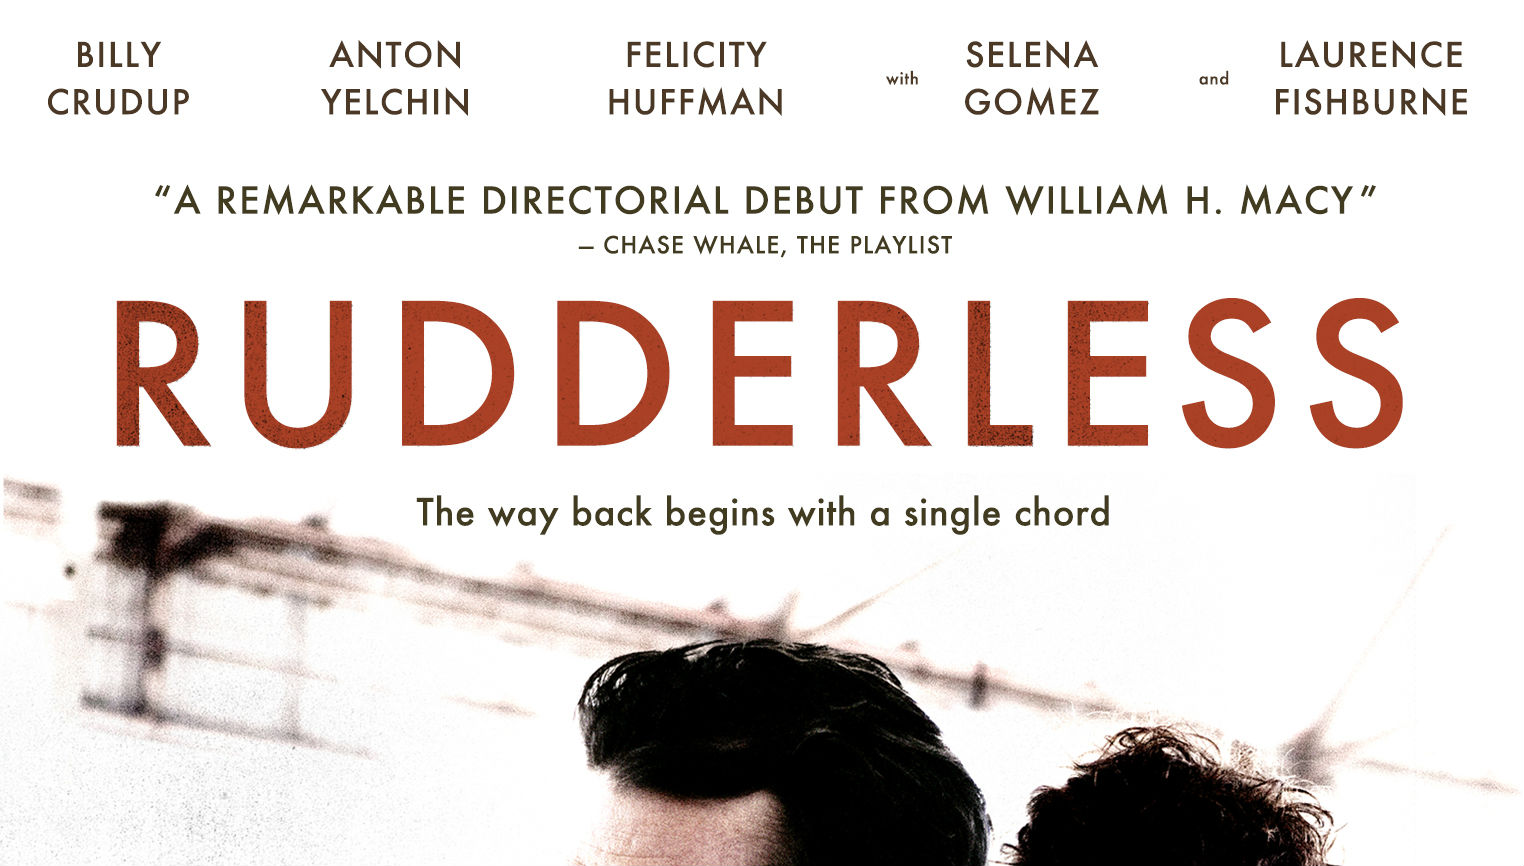 RUDDERLESS: William H. Macy’s Tough and Uncomfortably Moving Directorial Debut – DVD Review